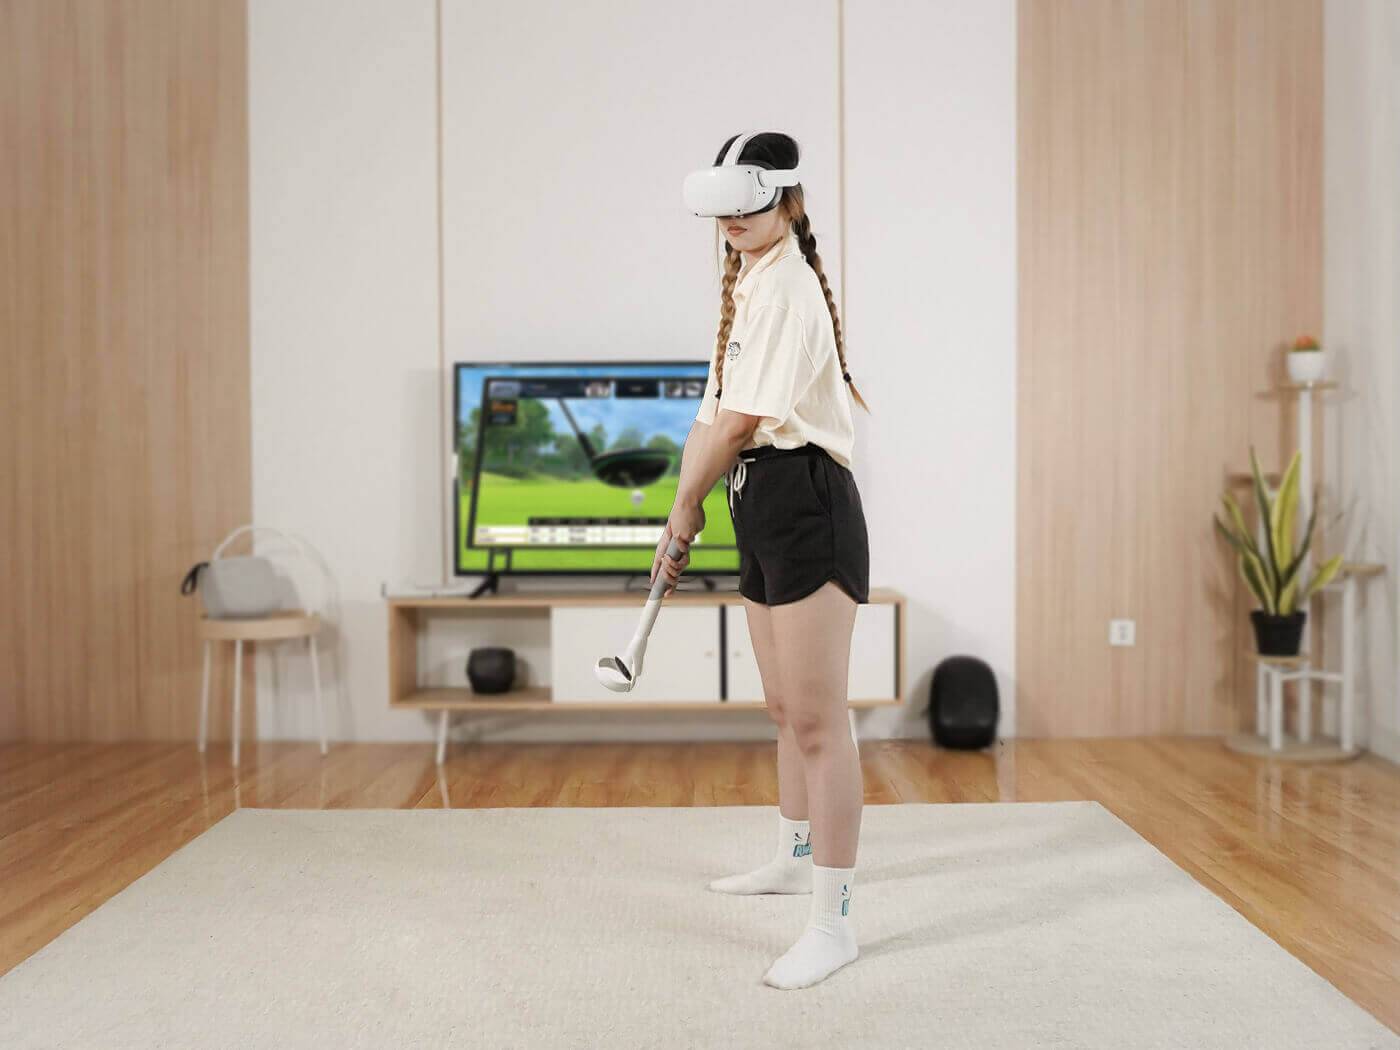 The best Oculus Quest 2 golf games for 2023 And recommended accessories